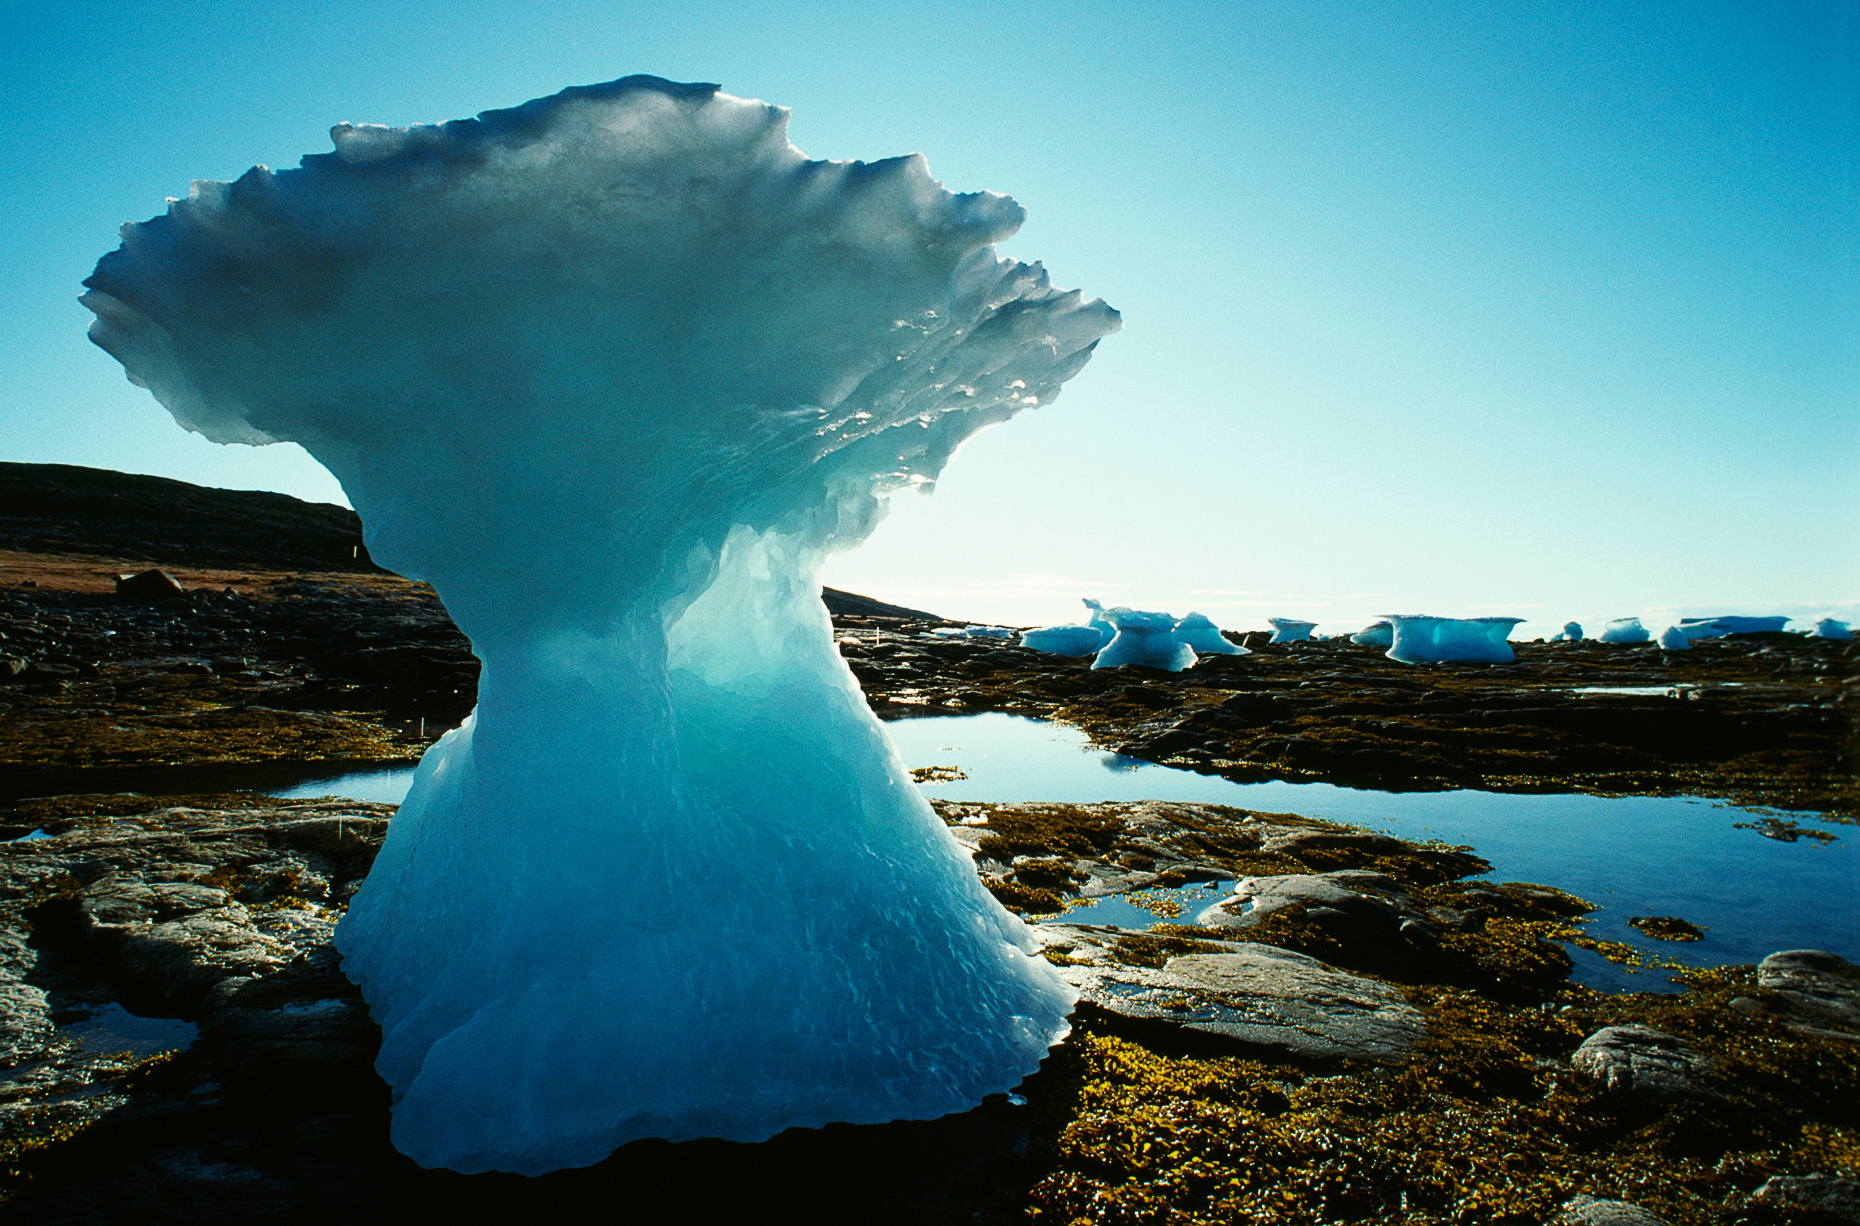 Sea ice (icebergs) stranded at low tide